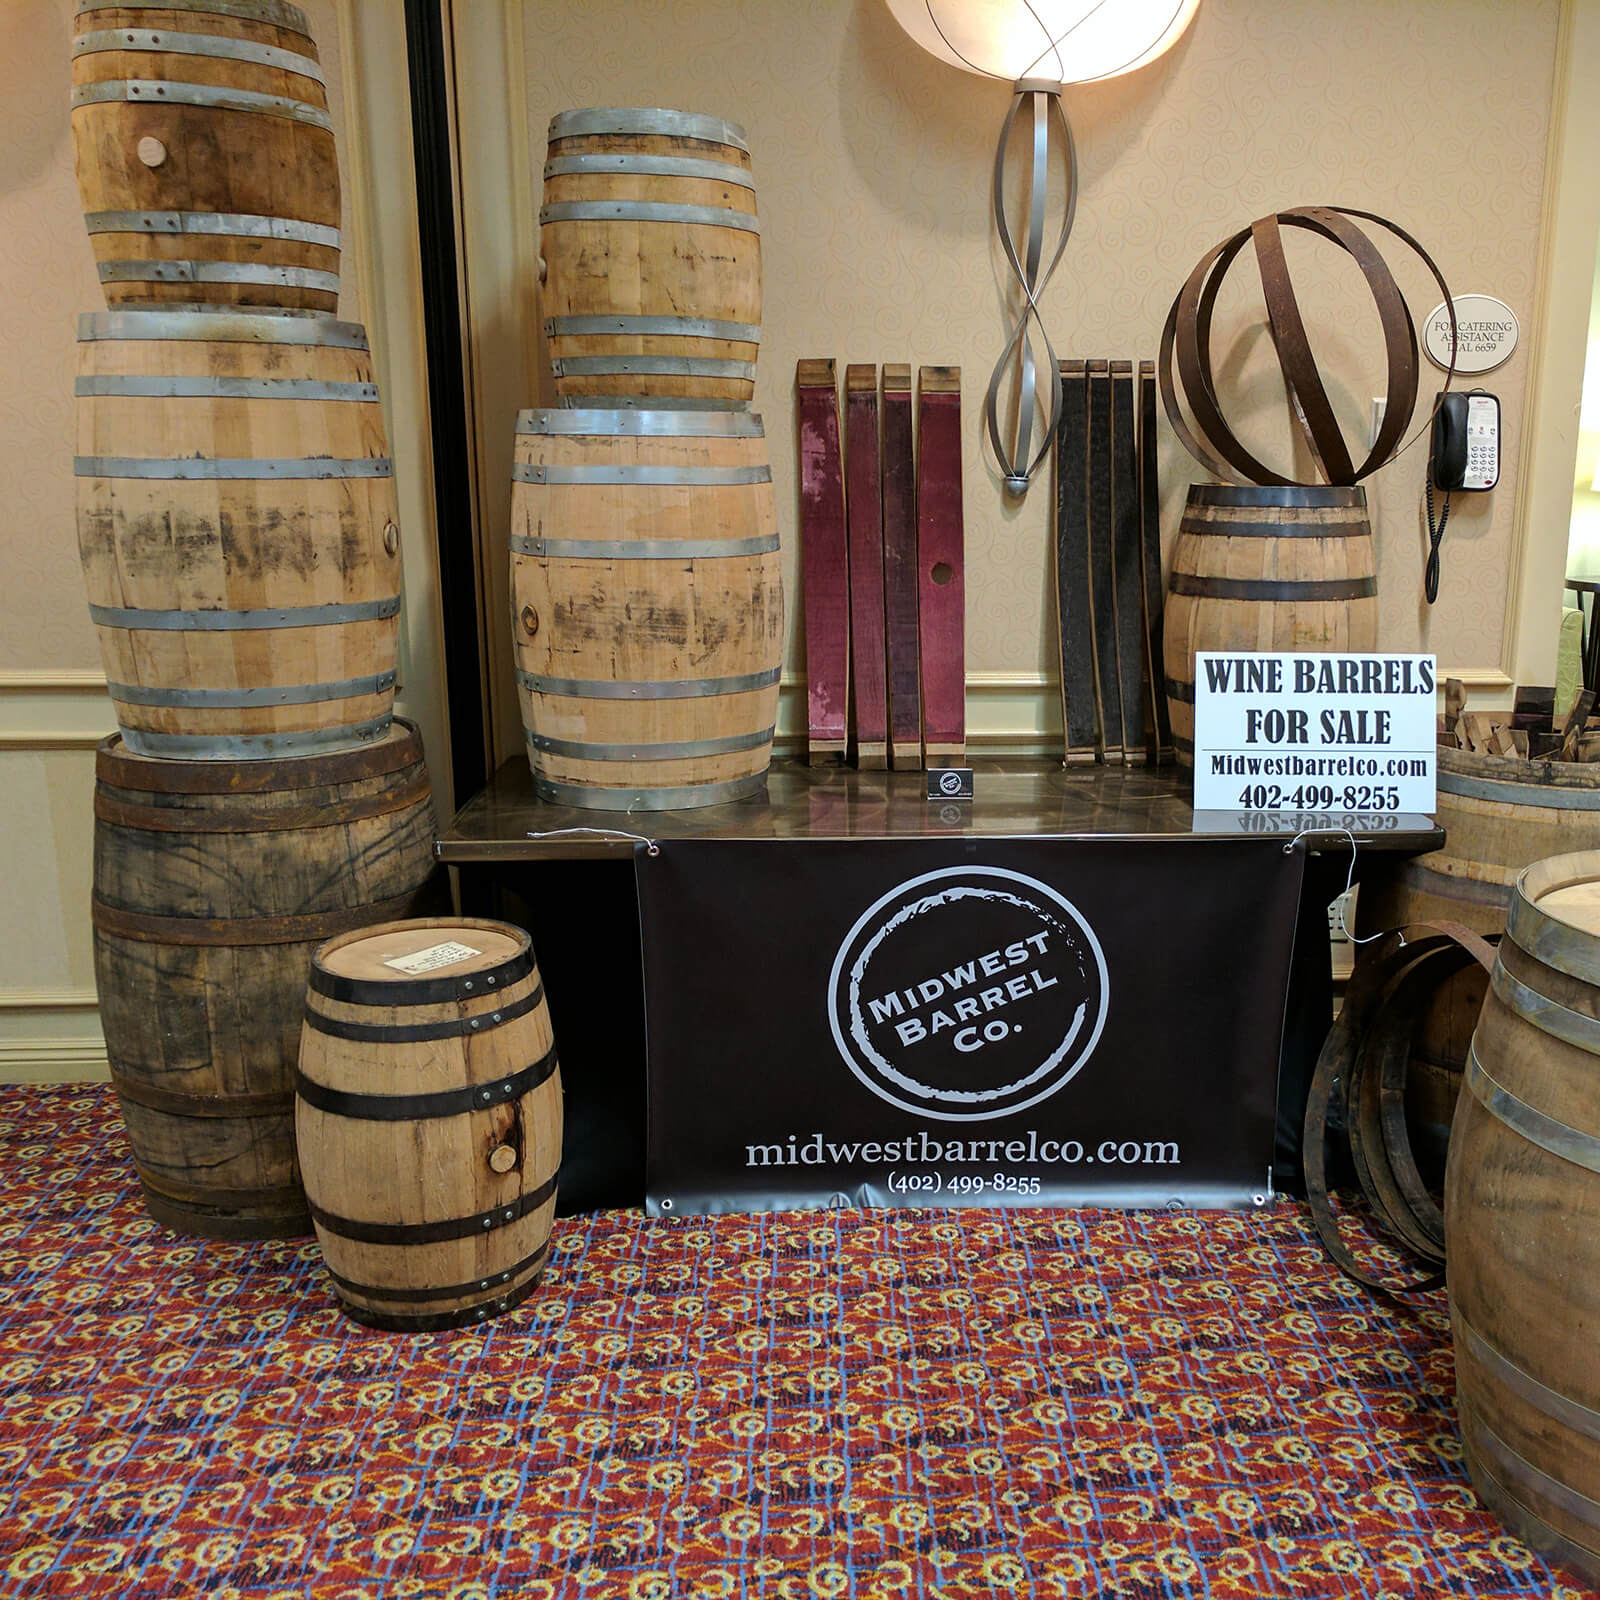 Midwest Barrel Co. display booth with different sizes of wine and whiskey barrels, barrel staves and barrel rings with sign that says Wine Barrels For Sale